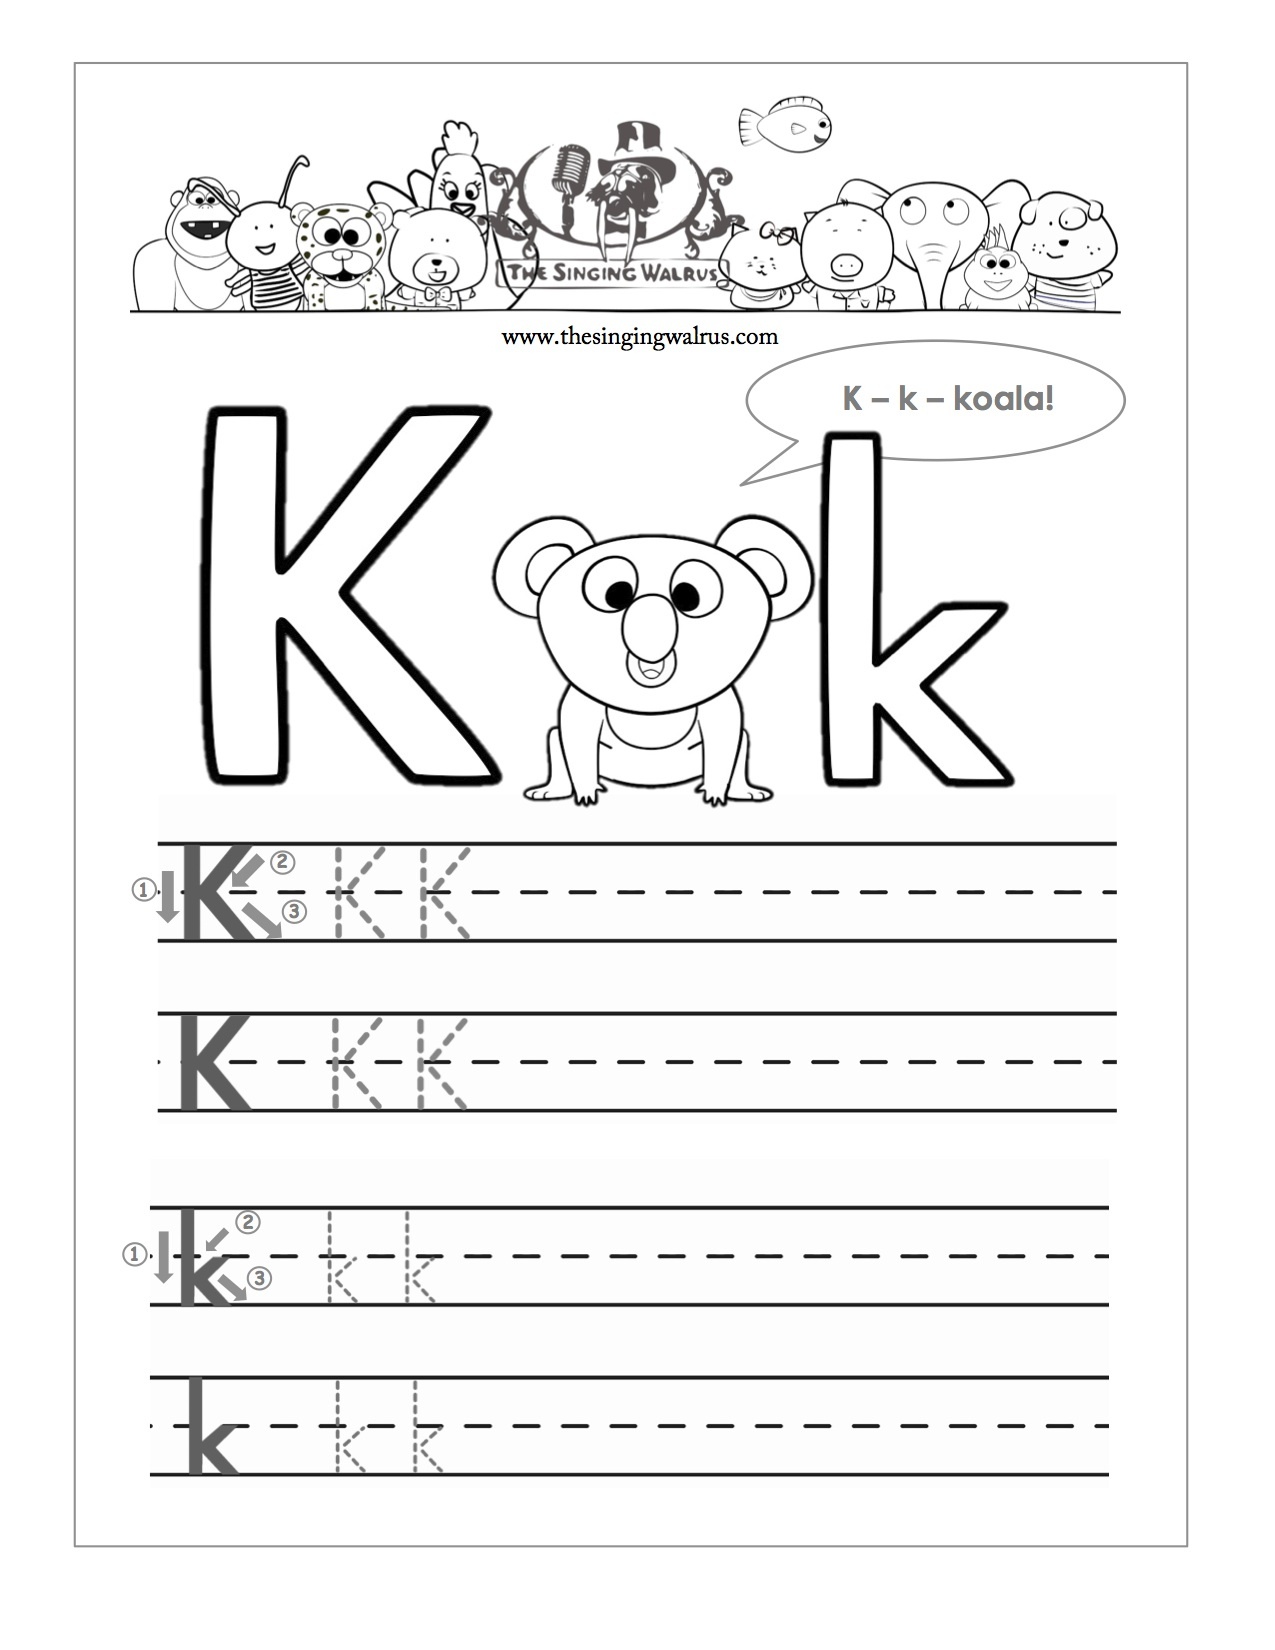 15 Learning The Letter K Worksheets | Kittybabylove - Free Printable Letter K Worksheets